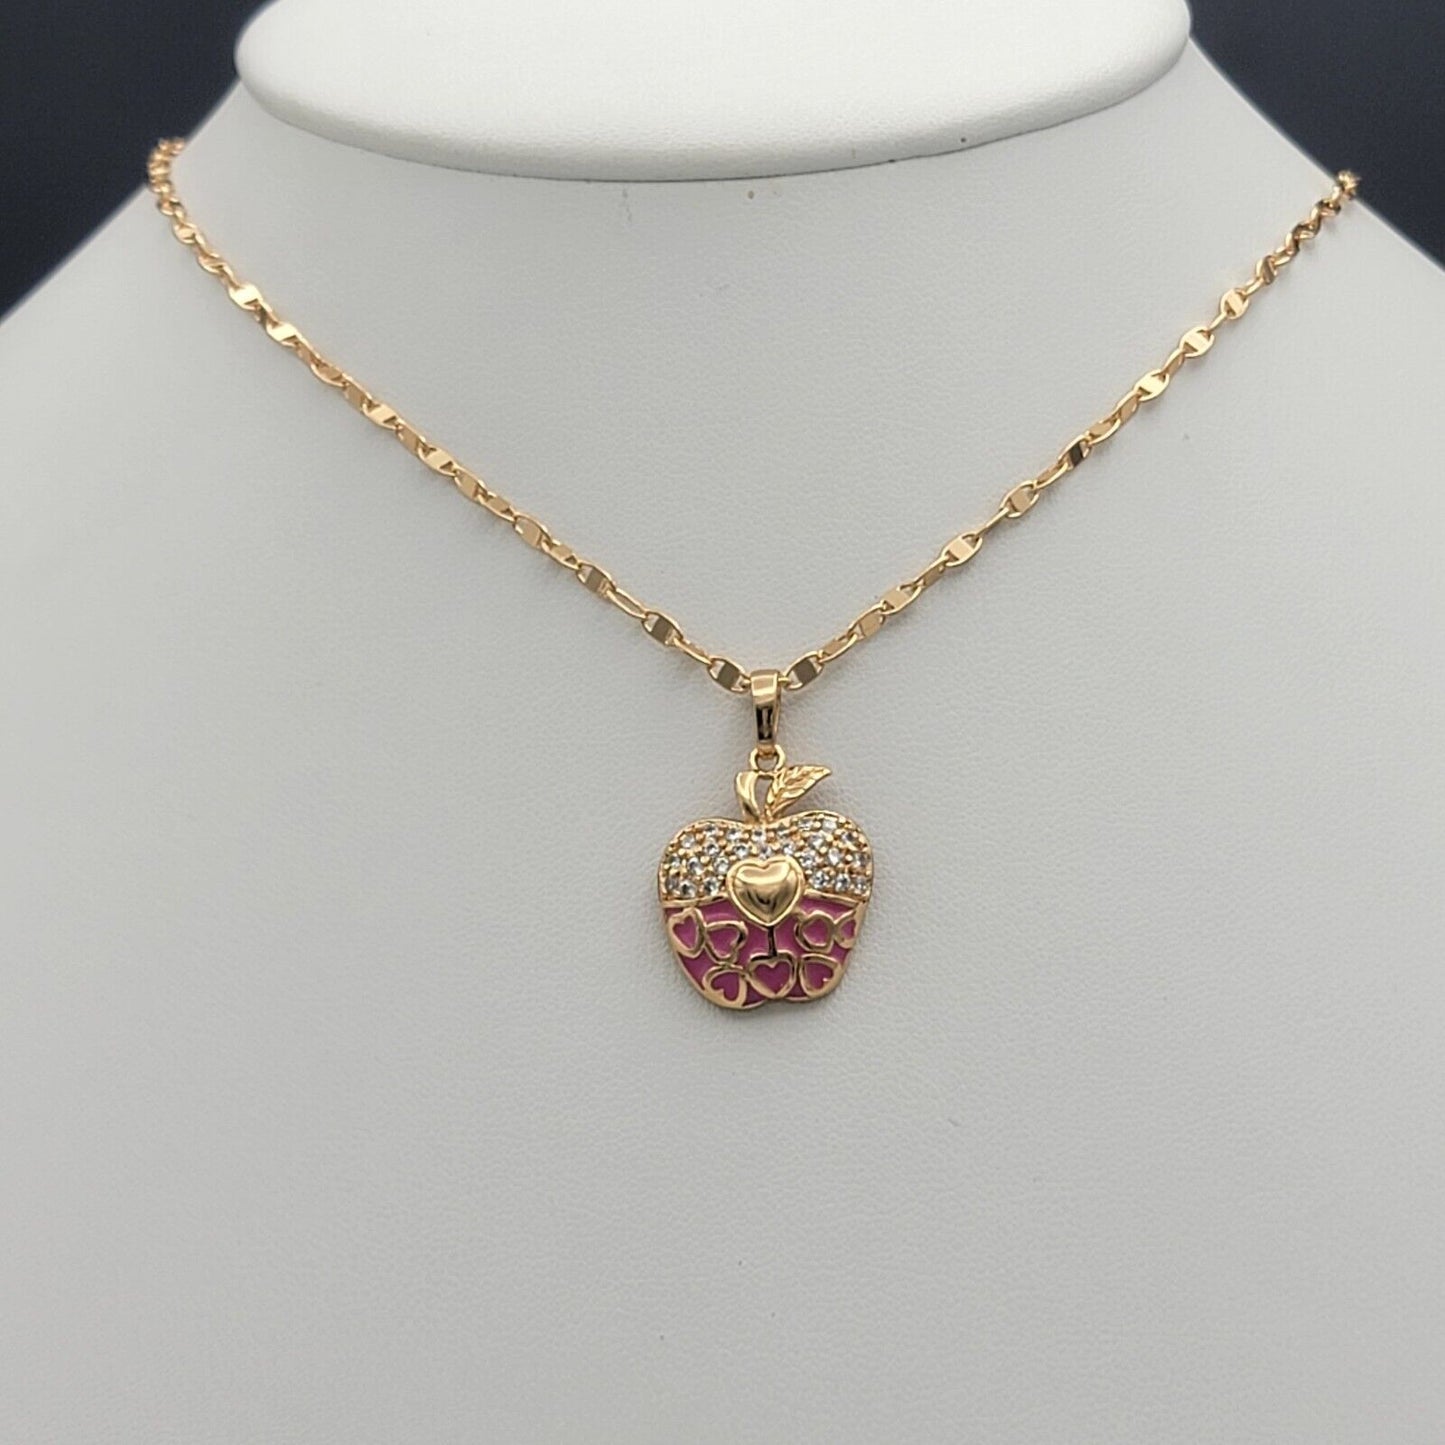 Necklaces - 18K Gold Plated. Hearts Pink Apple Pendant & Chain.